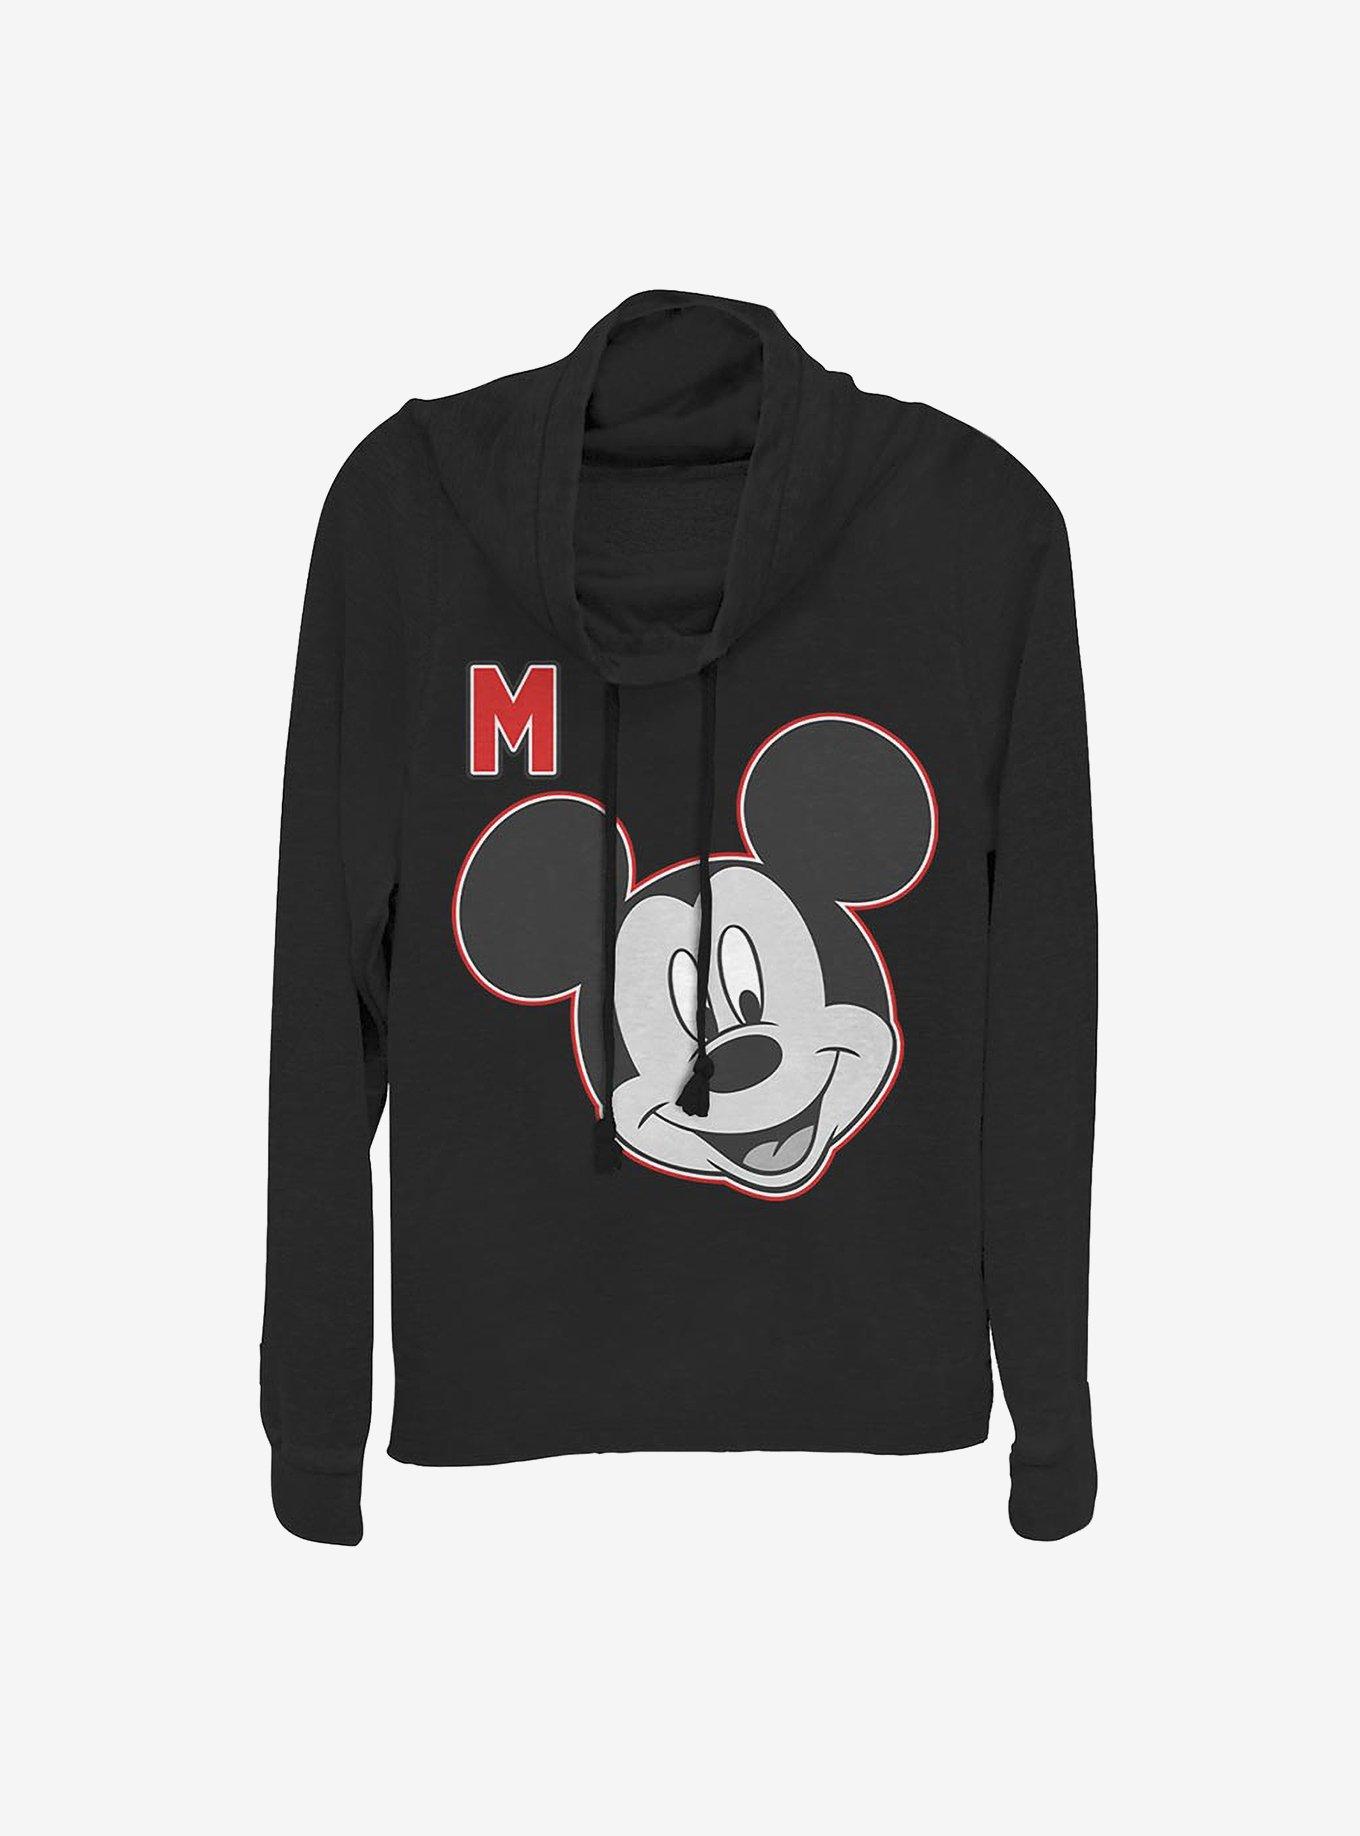 Disney Mickey Mouse Letter Mickey Cowlneck Long-Sleeve Girls Top, BLACK, hi-res